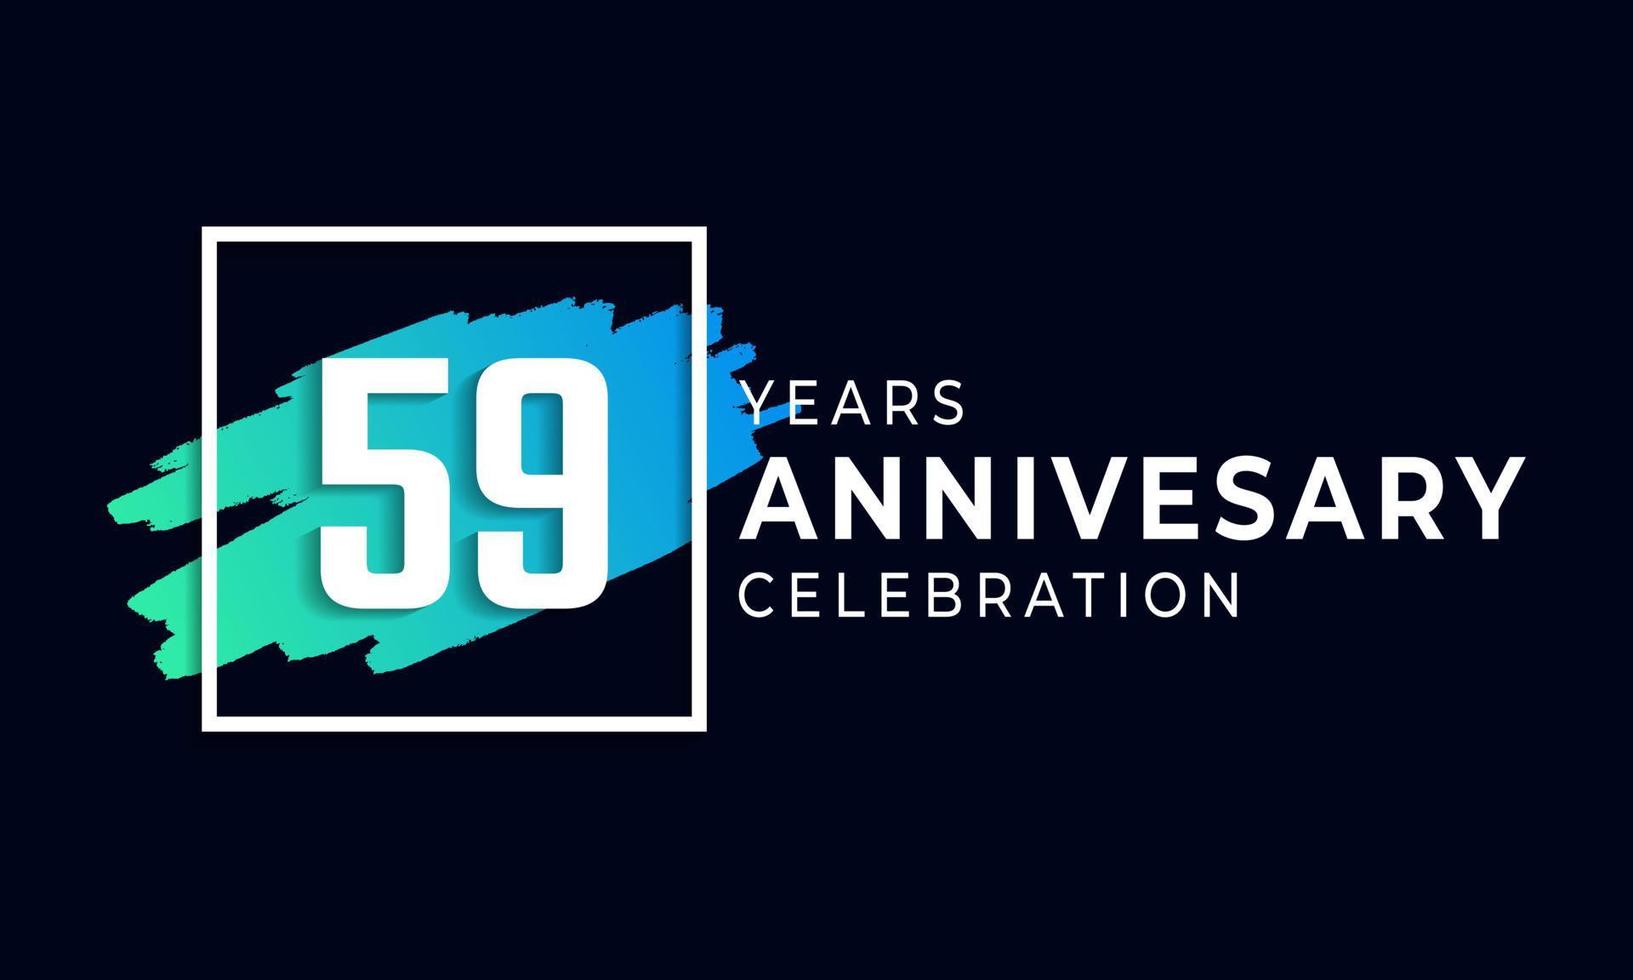 59 Year Anniversary Celebration with Blue Brush and Square Symbol. Happy Anniversary Greeting Celebrates Event Isolated on Black Background vector